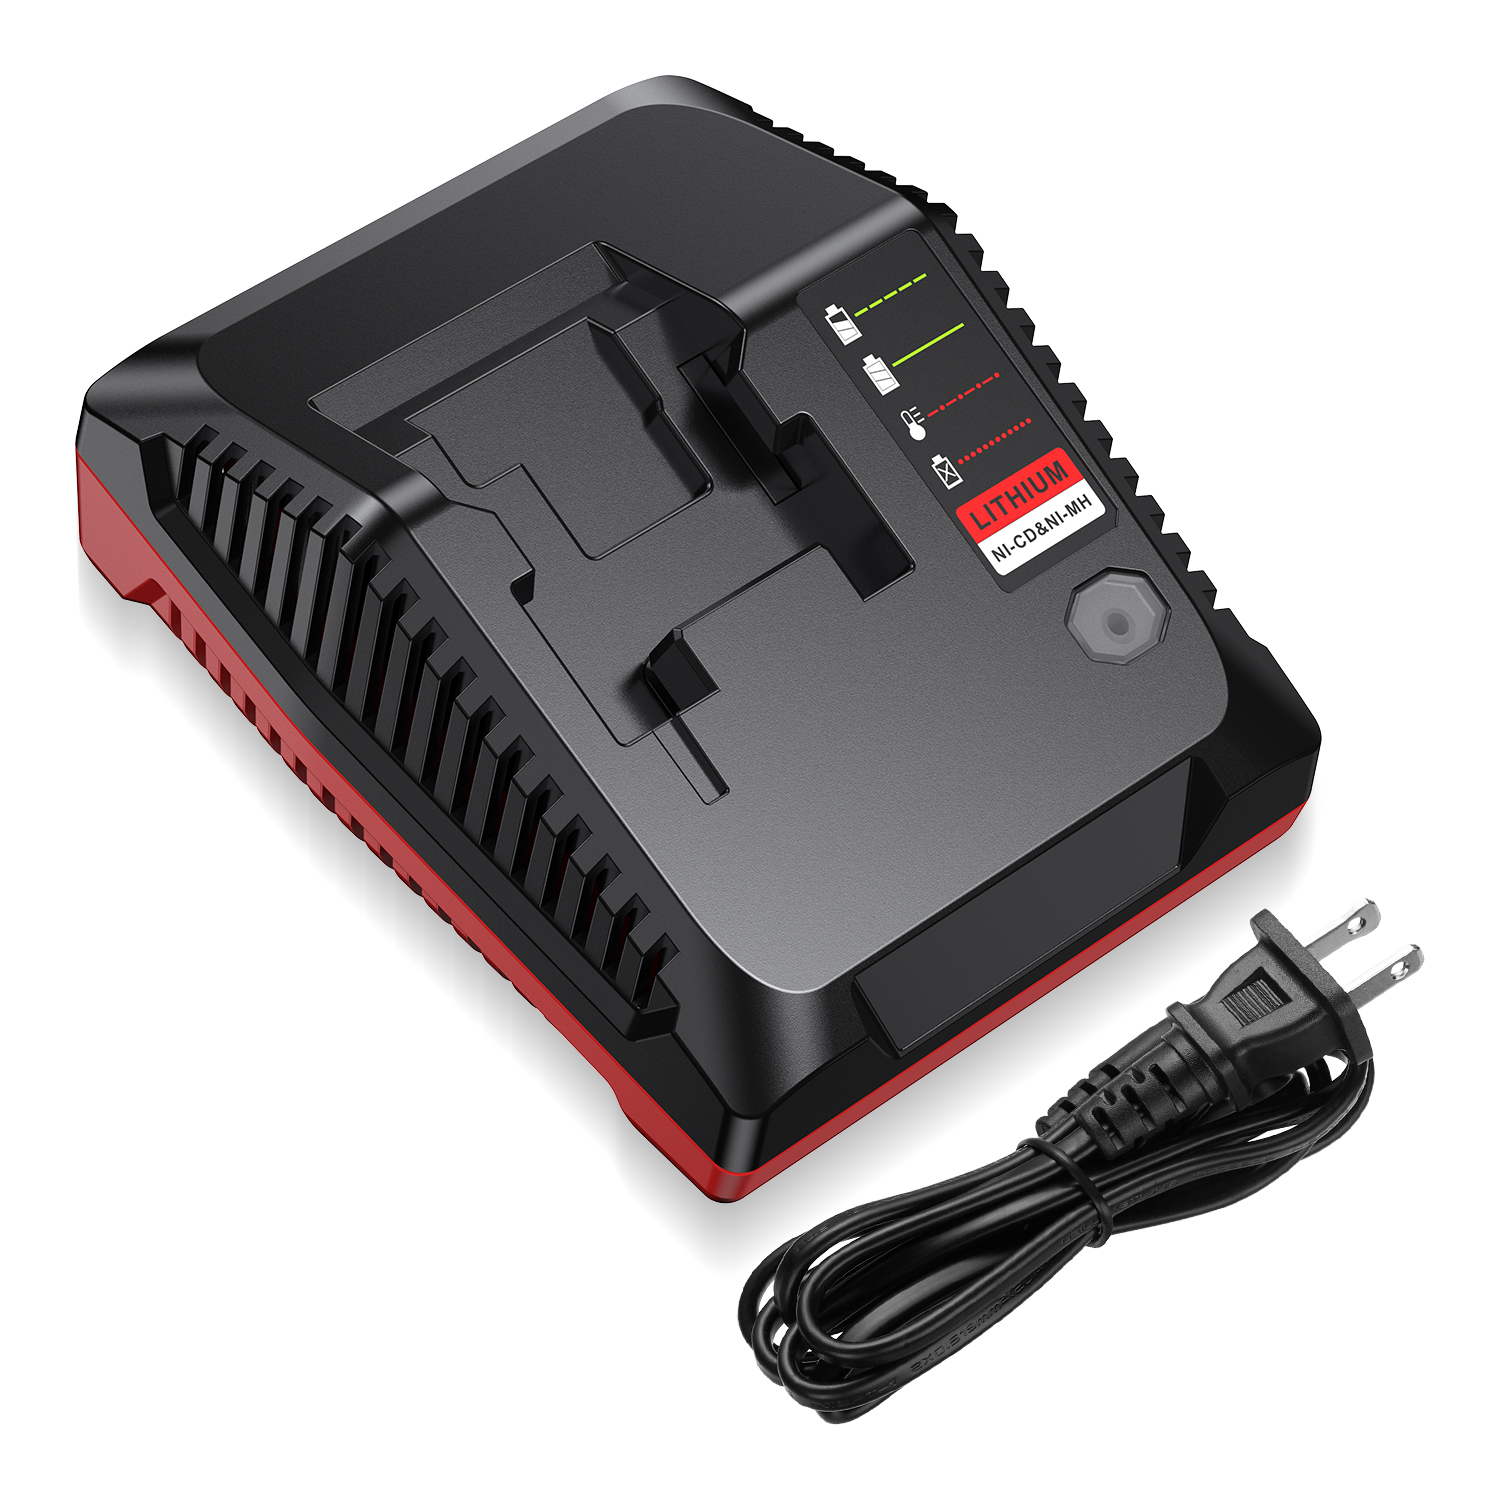 18 Volt NiCd Battery Charger fully Charges A Battery In Just 3 to 5 Hours New